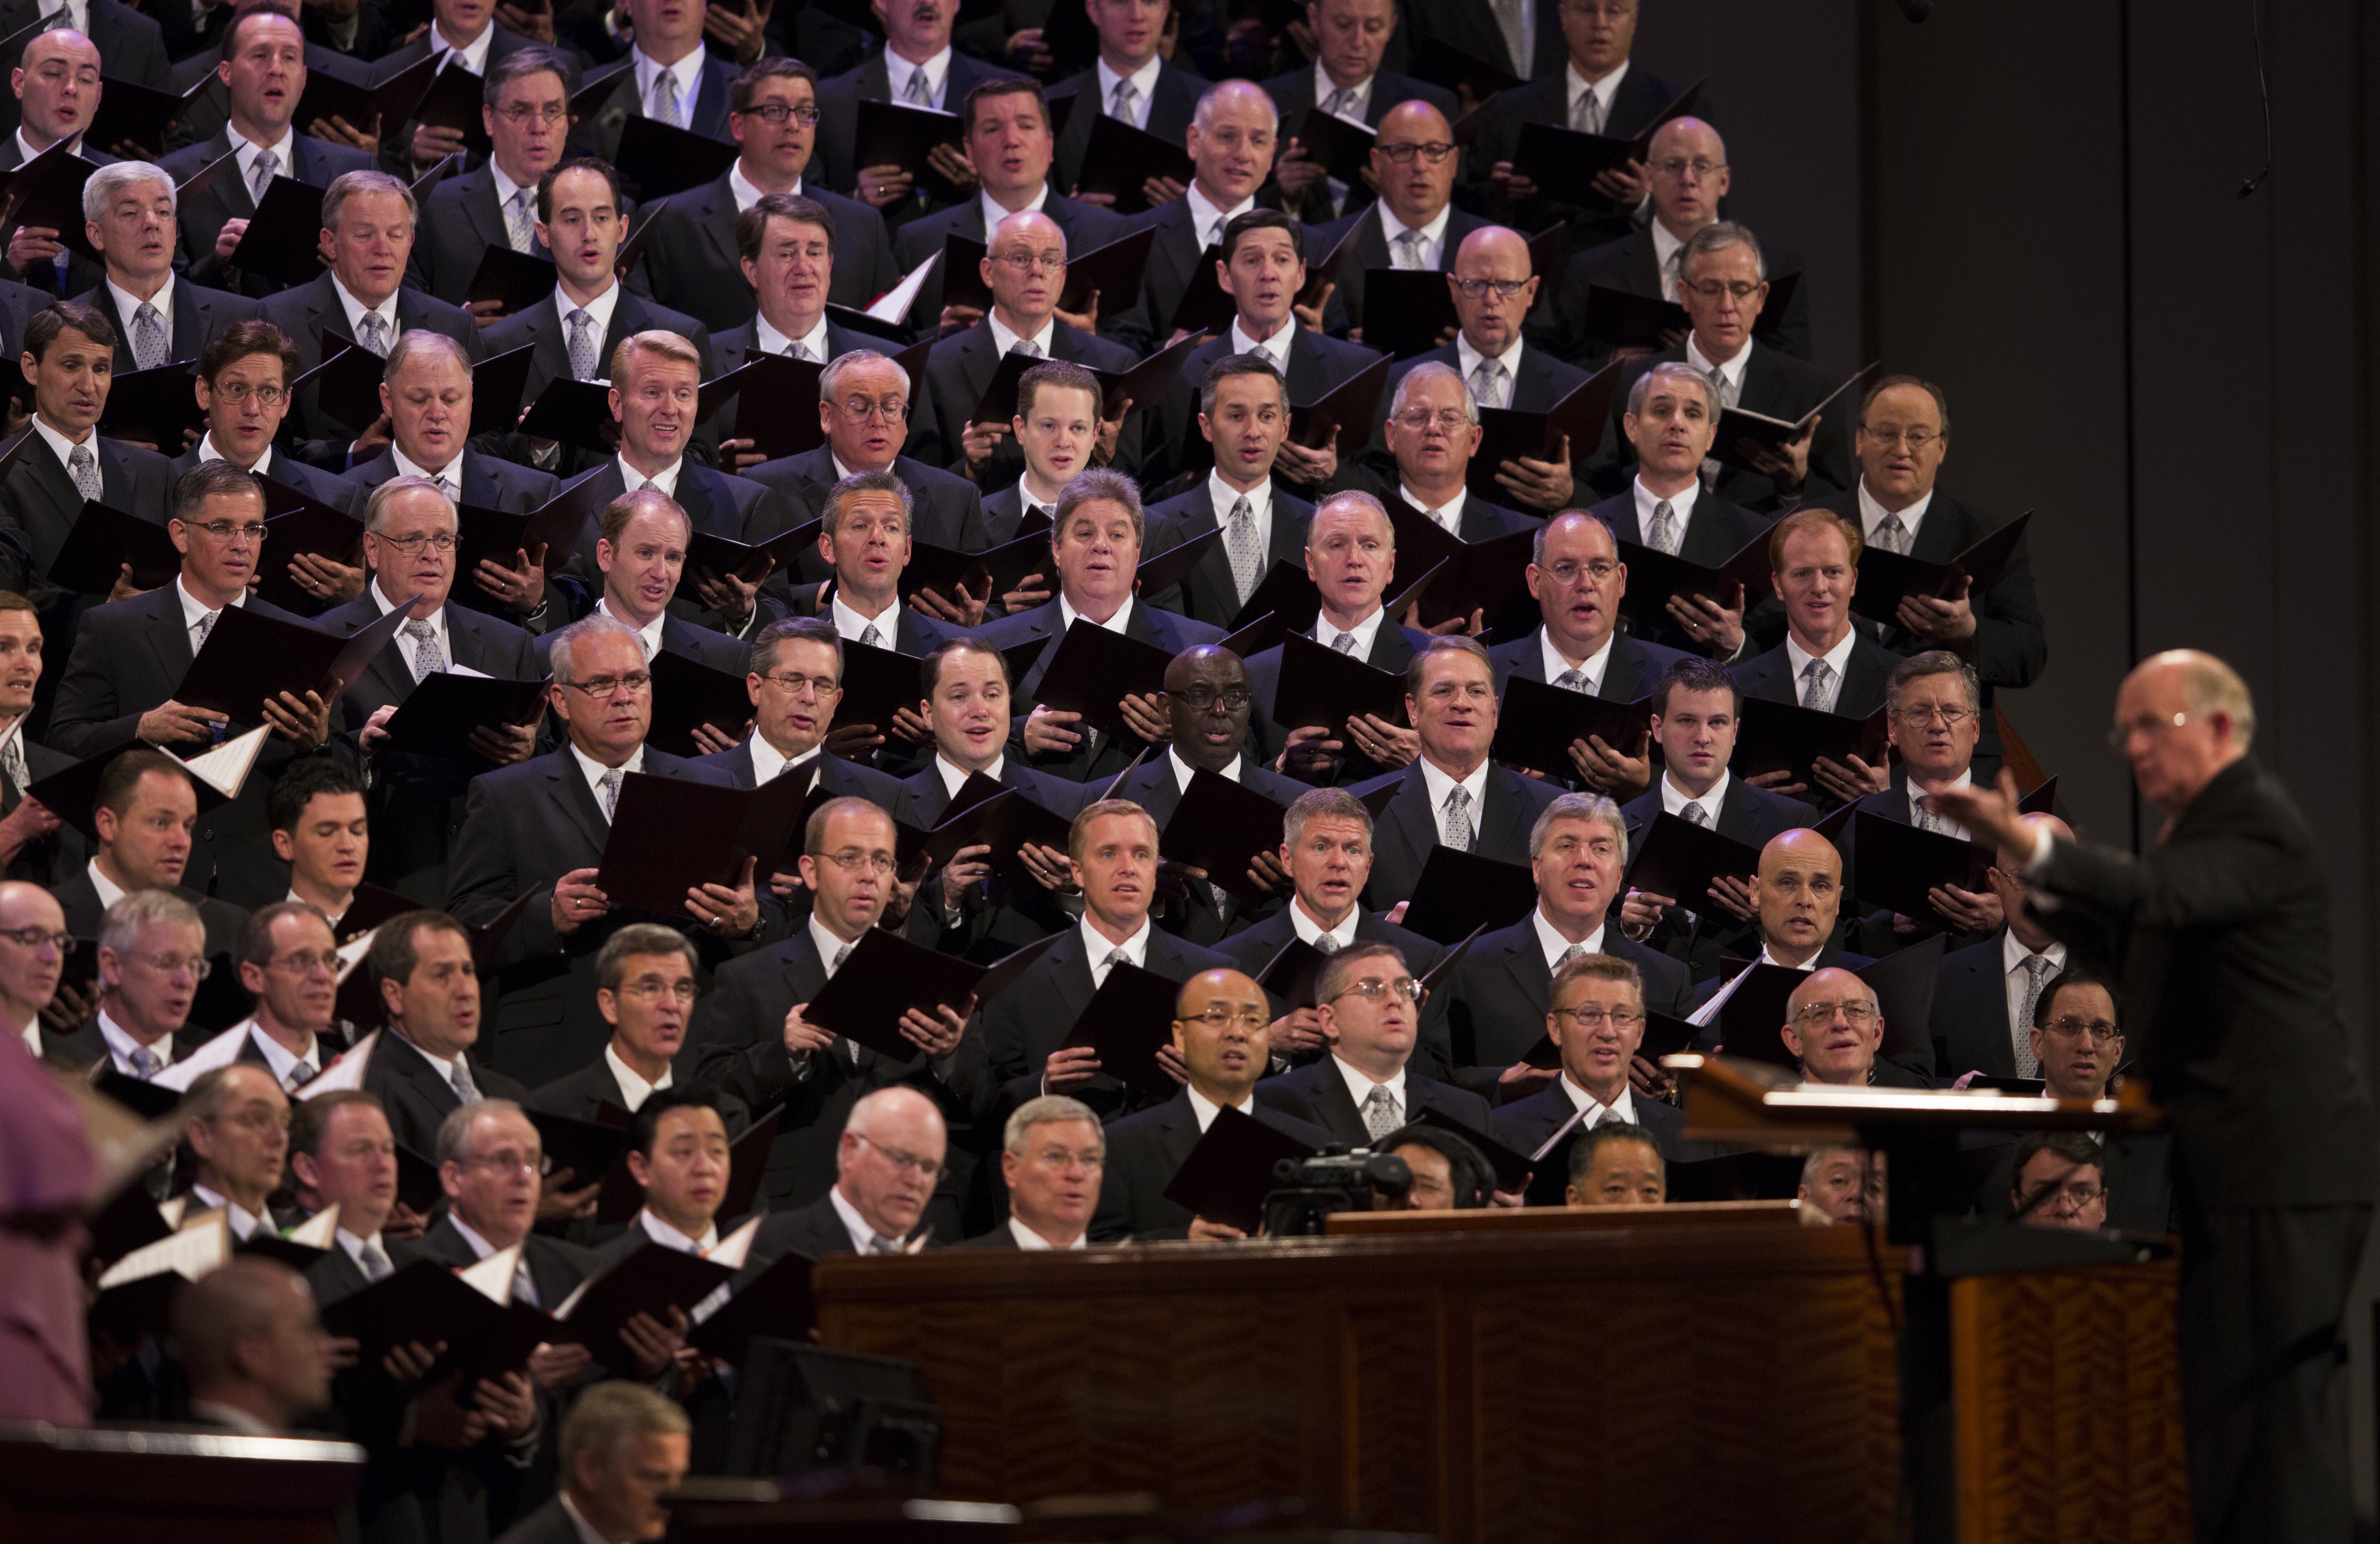 Rows of men from the Mormon Tabernacle Choir wearing dark suits and singing while Mack Wilberg conducts.